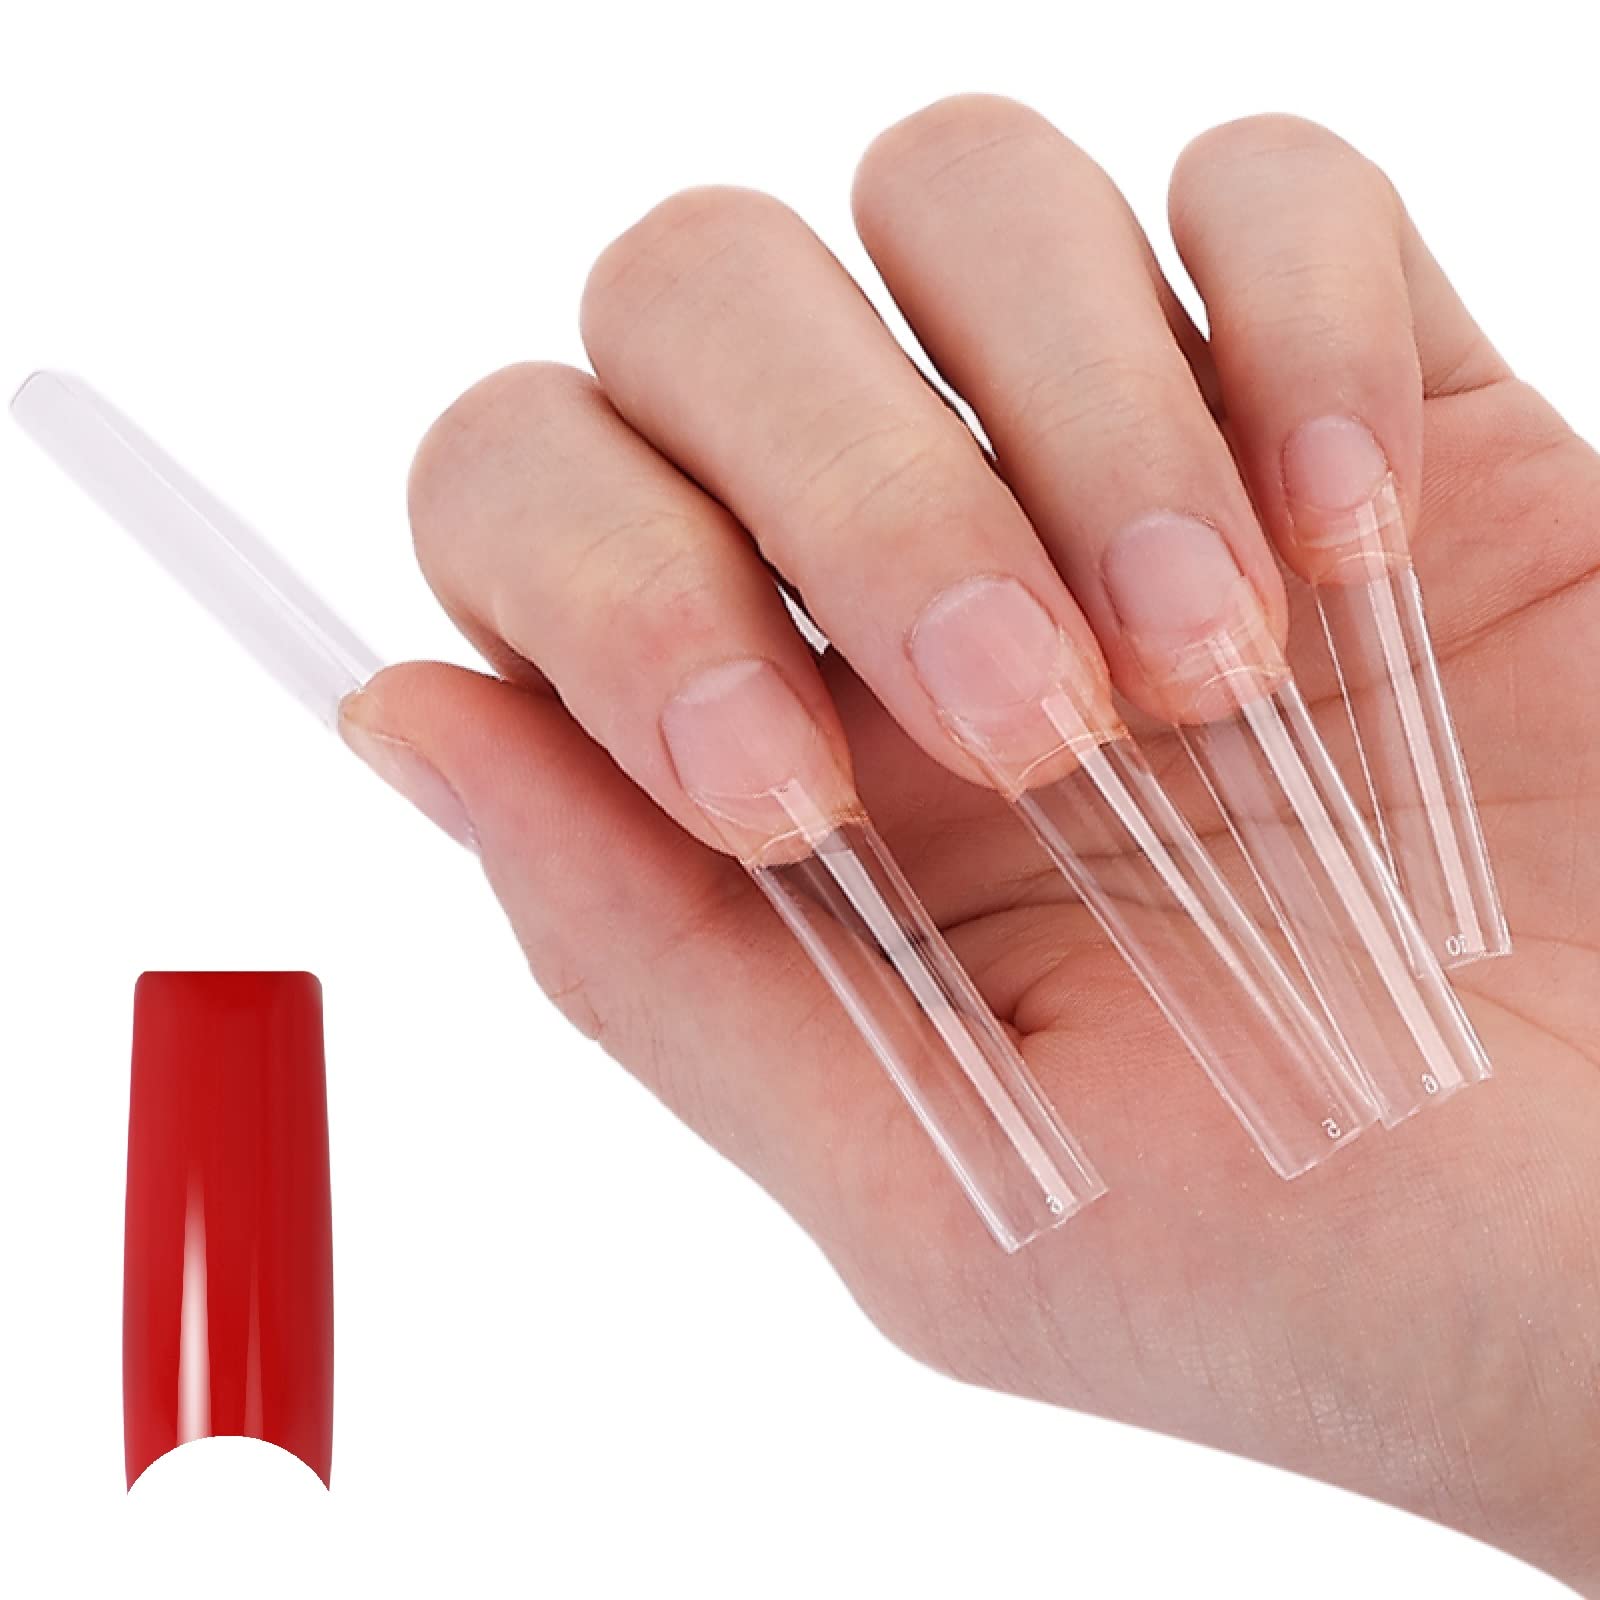 What tools do you use to make artificial nail tips?